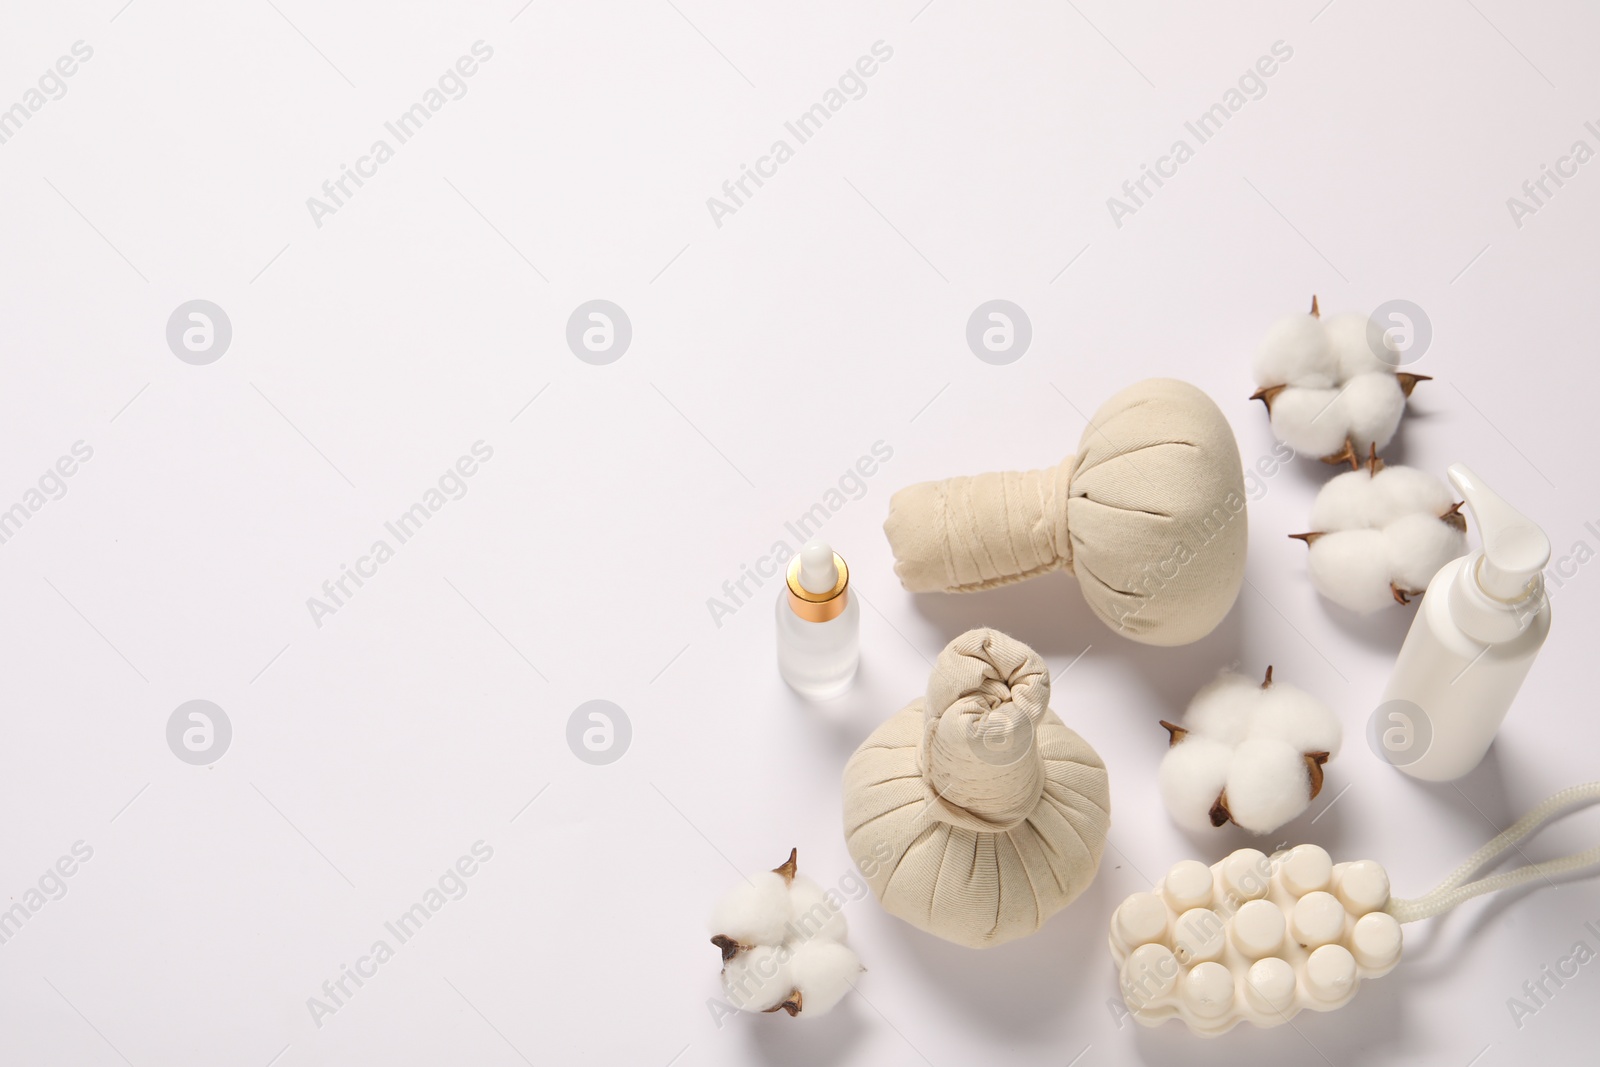 Photo of Bath accessories. Different personal care products and cotton flowers on white background, above view with space for text